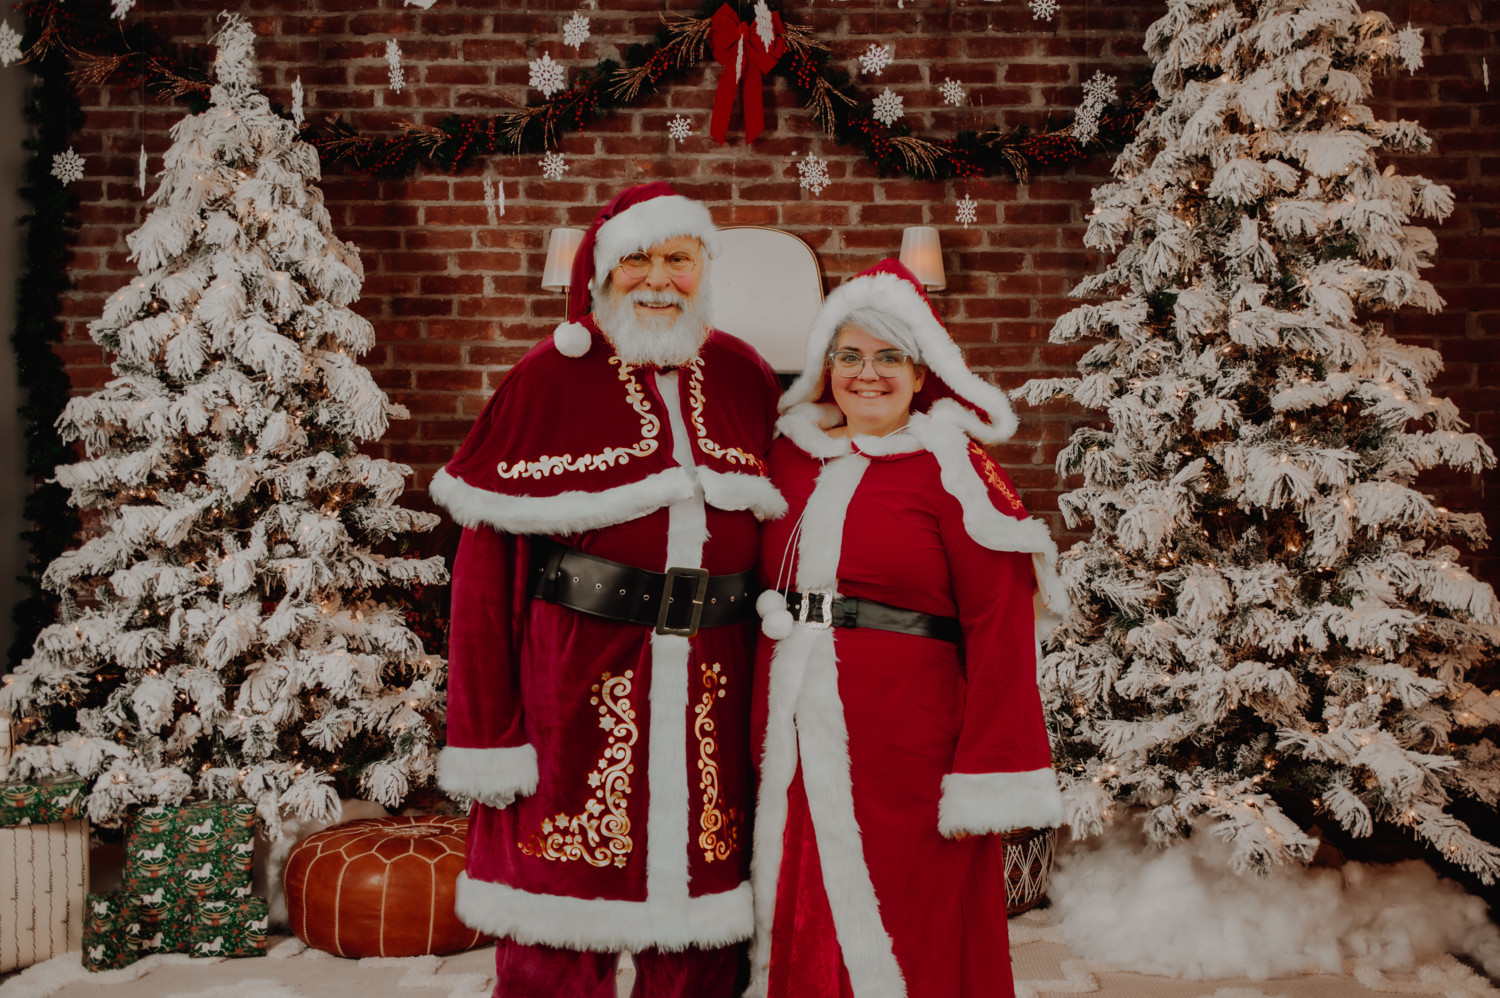 Hang with Mr. and Mrs. Claus | December 10 1:00pm